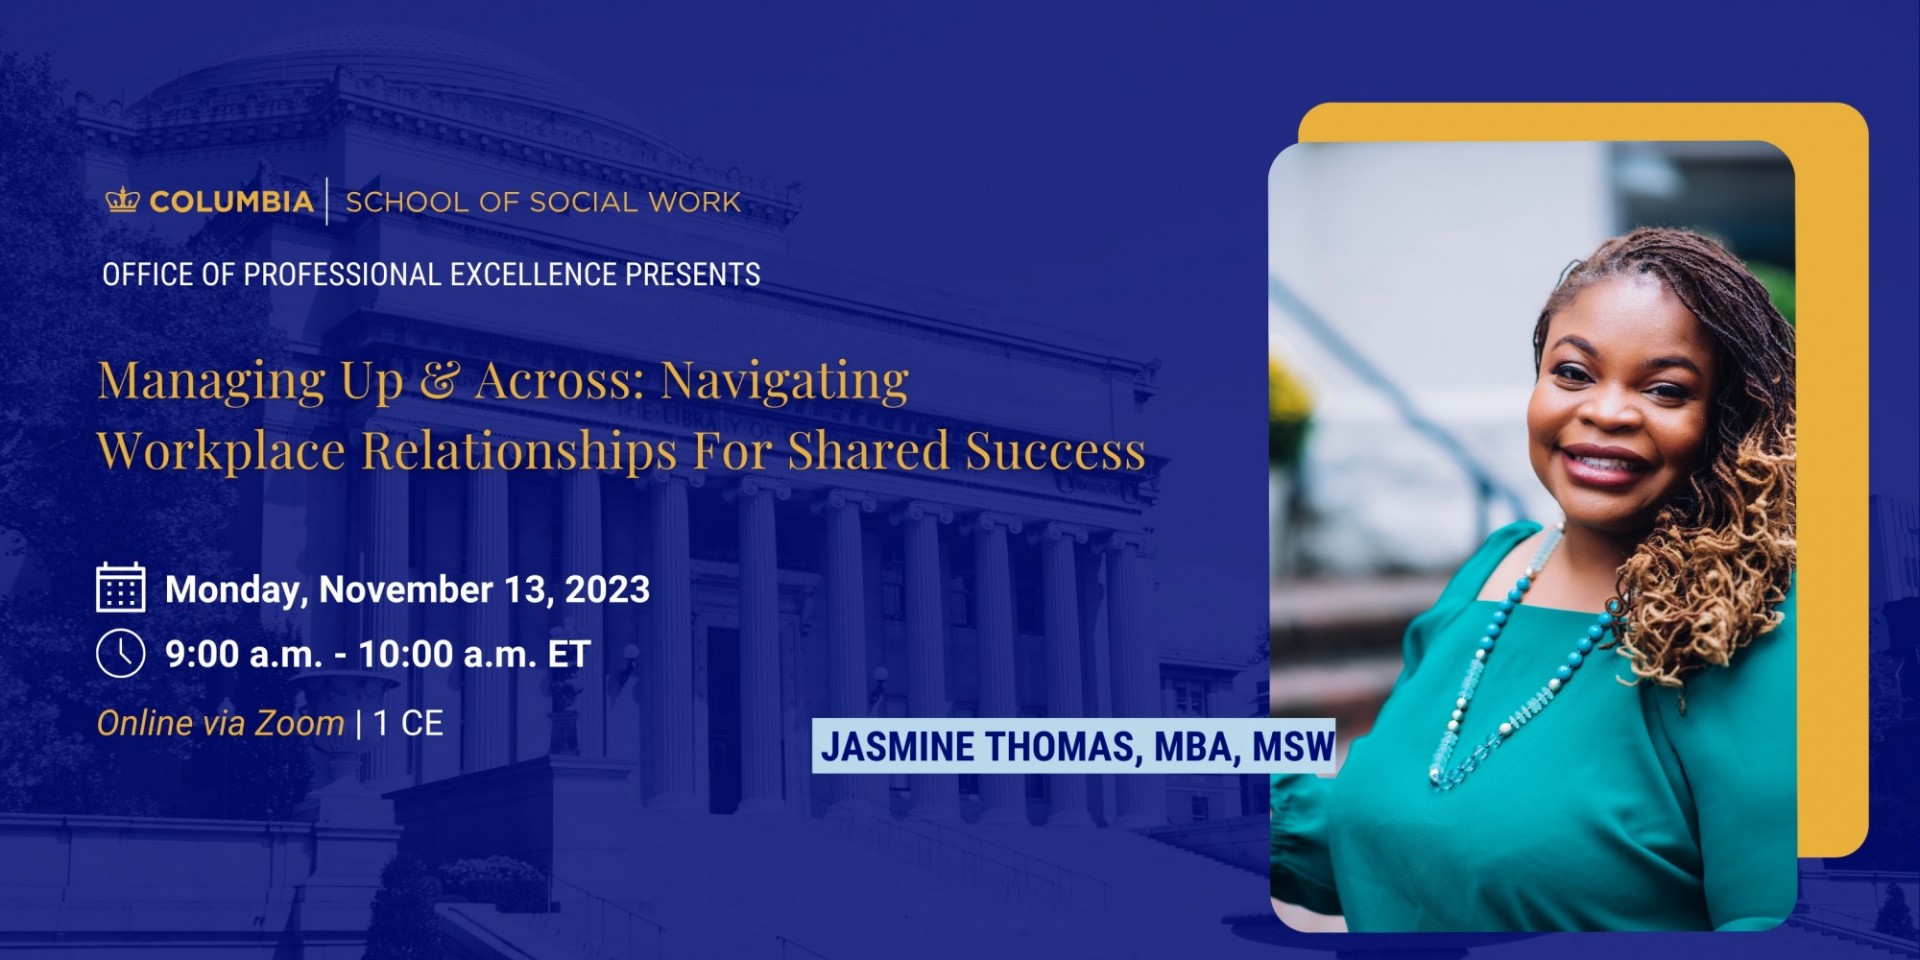 Managing Up & Across: Navigating Workplace Relationships for Shared Success